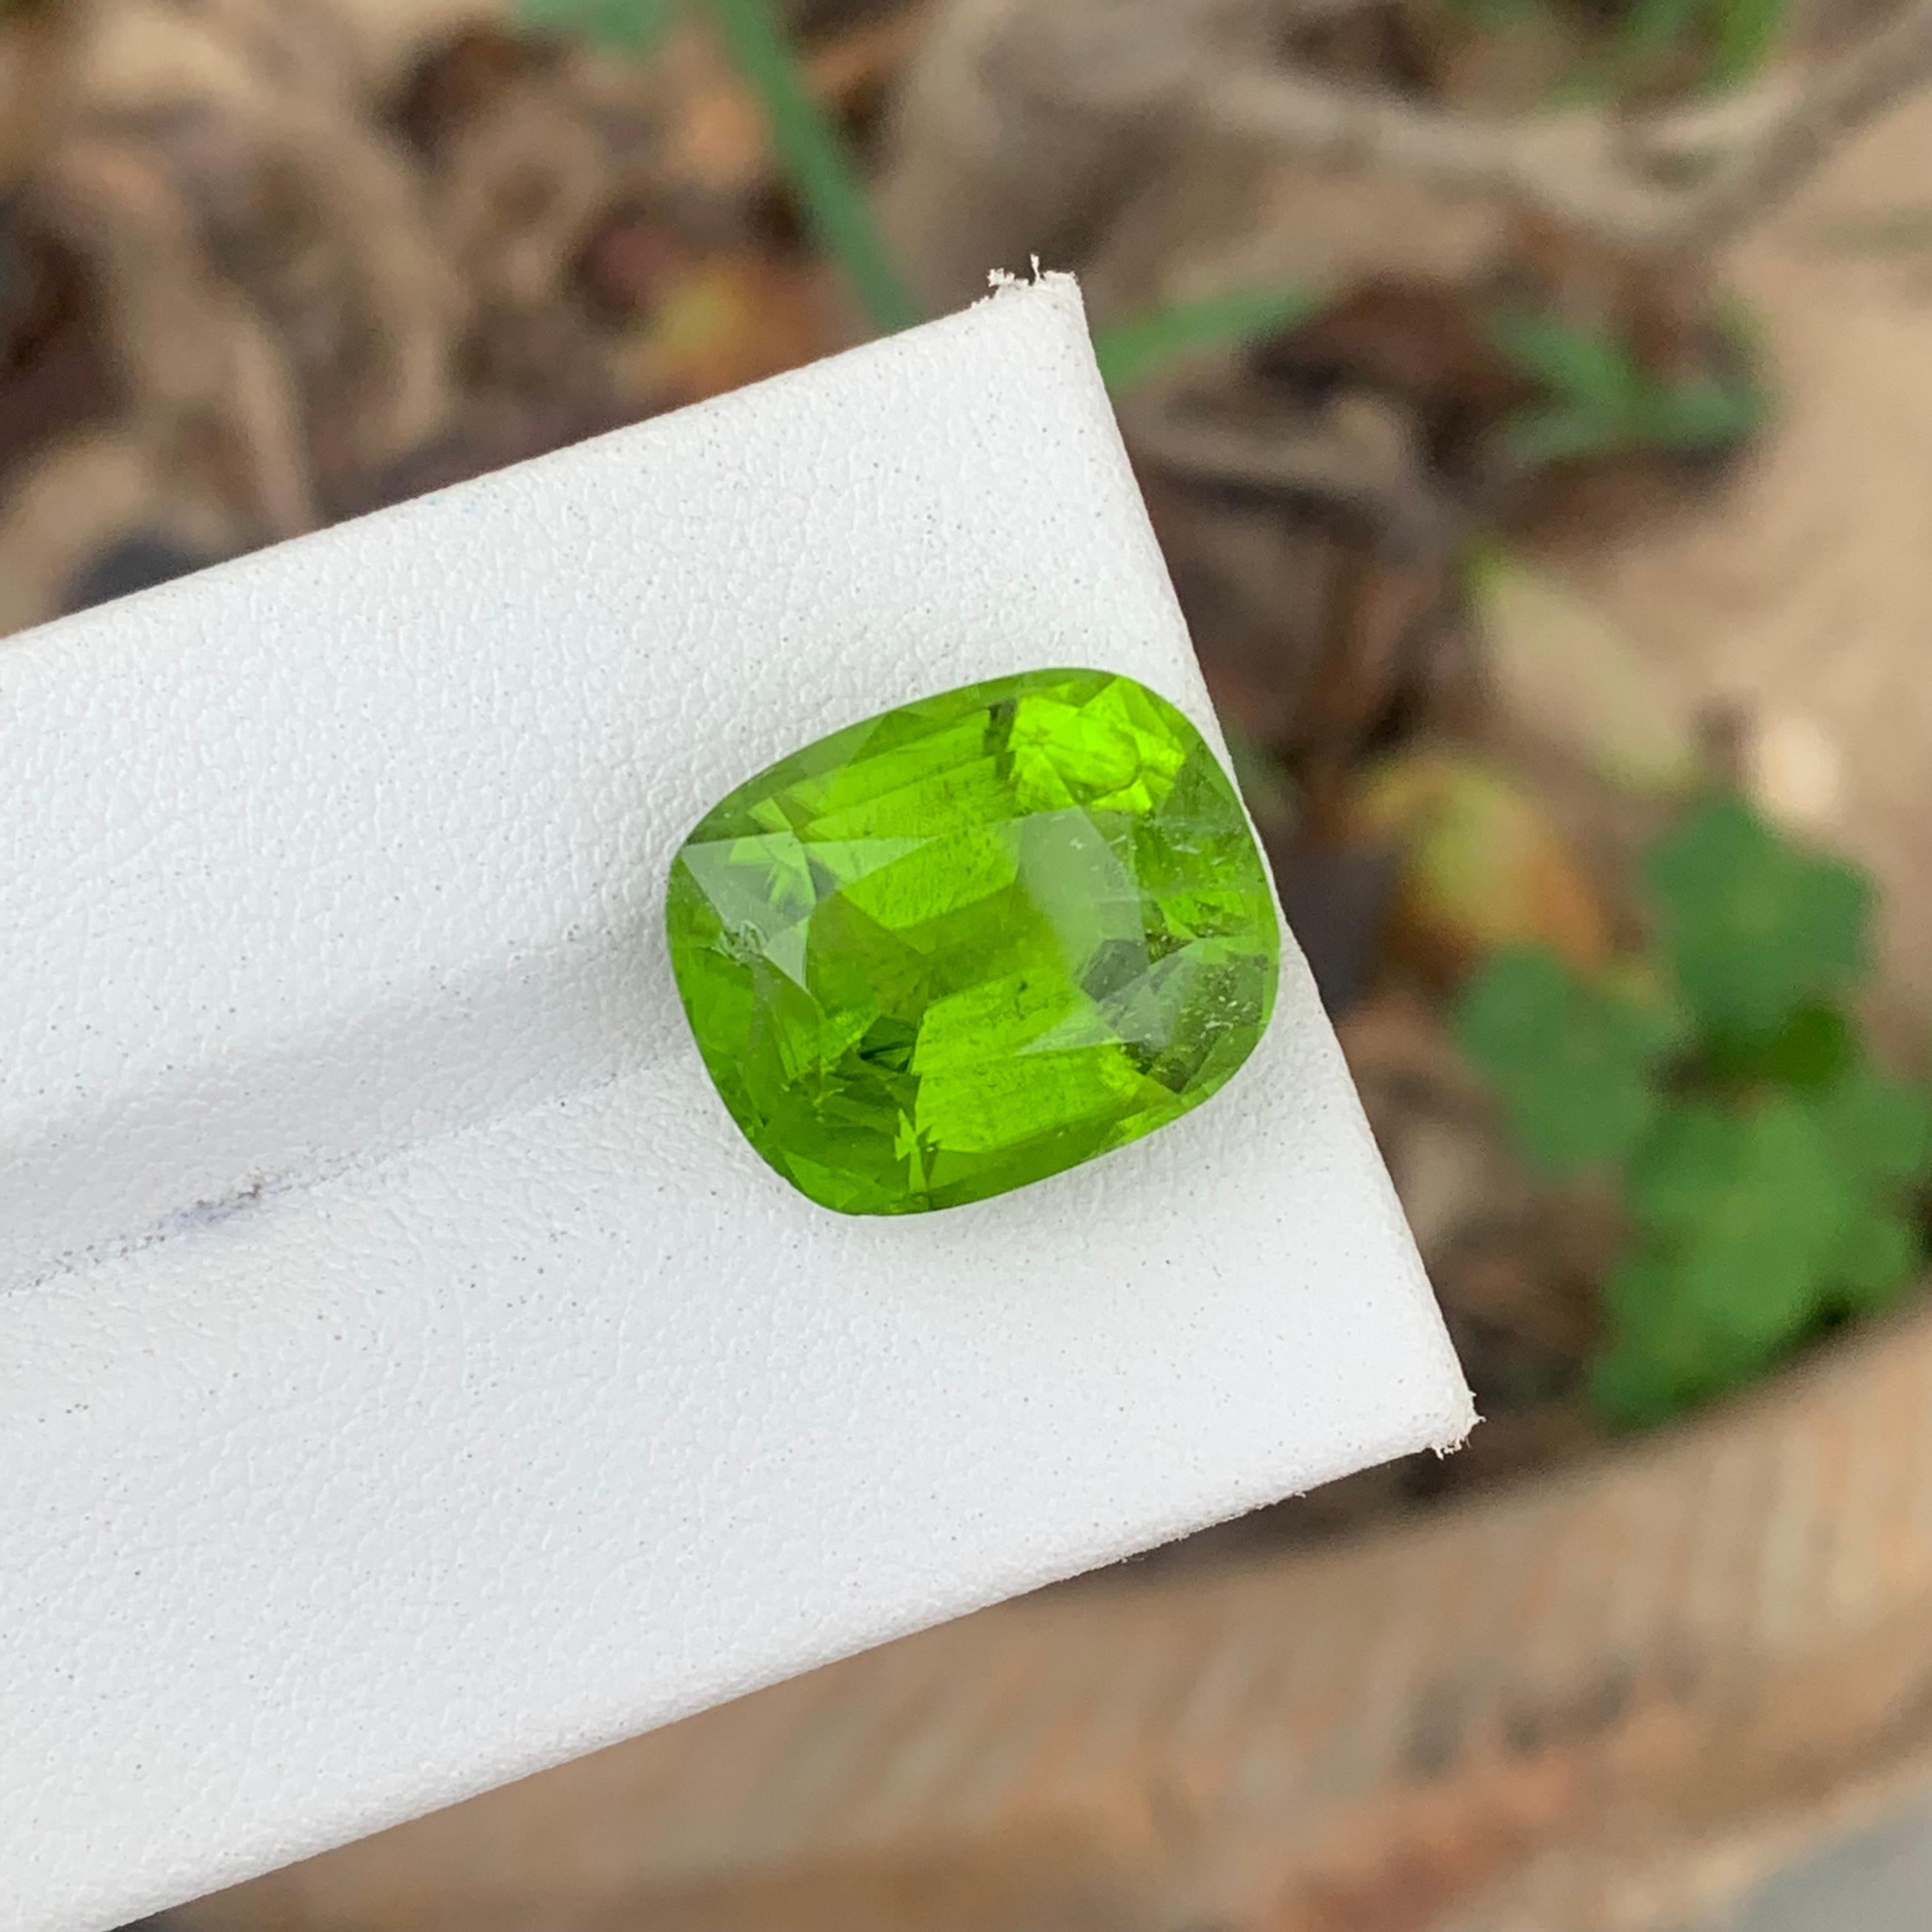 12.75 Carat Natural Cushion Cut Faceted Apple Green Peridot From Pakistan Mine For Sale 3